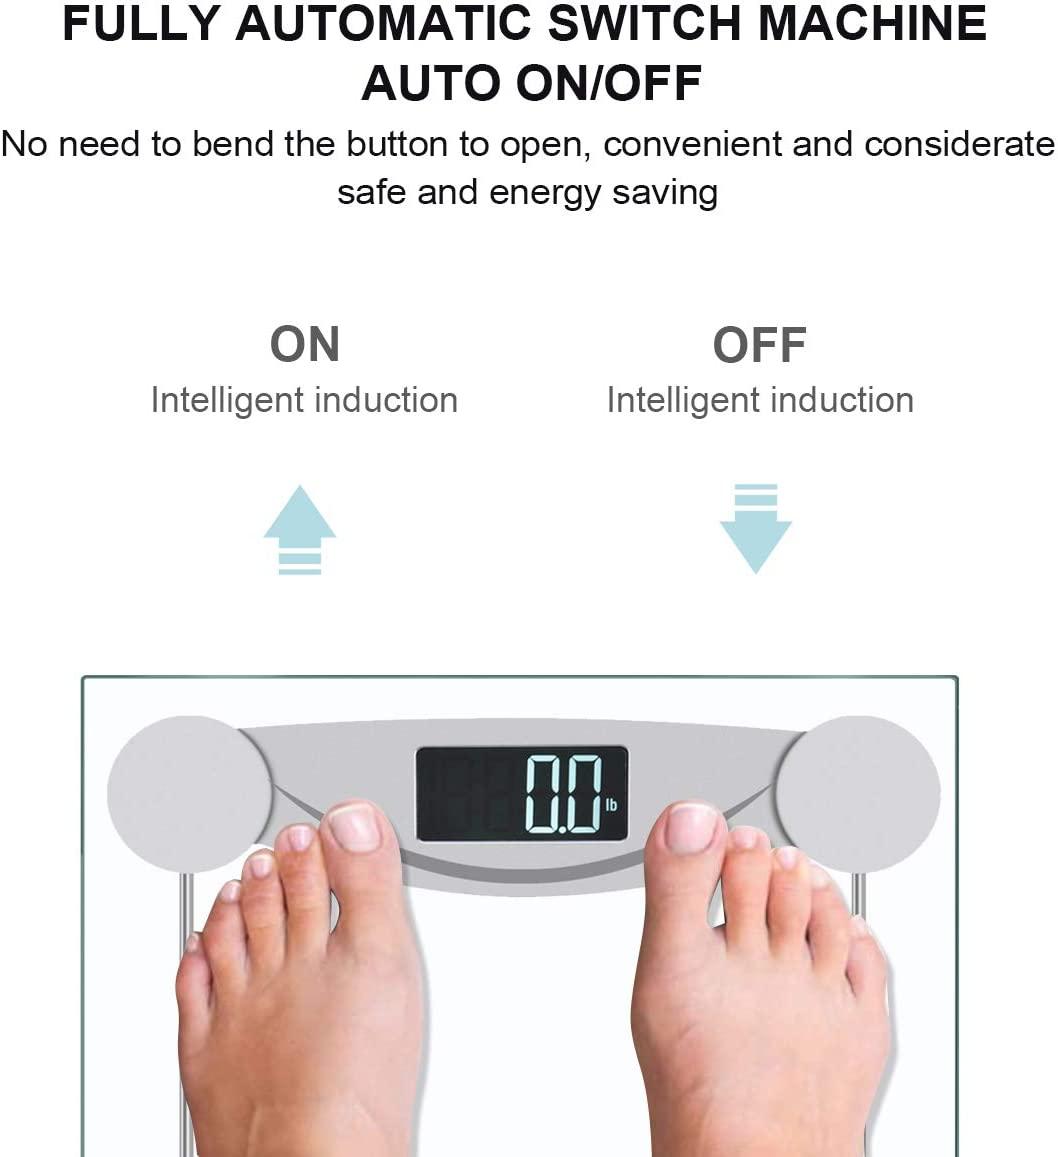 Digital Weight Machine for Unique Weighing Needs